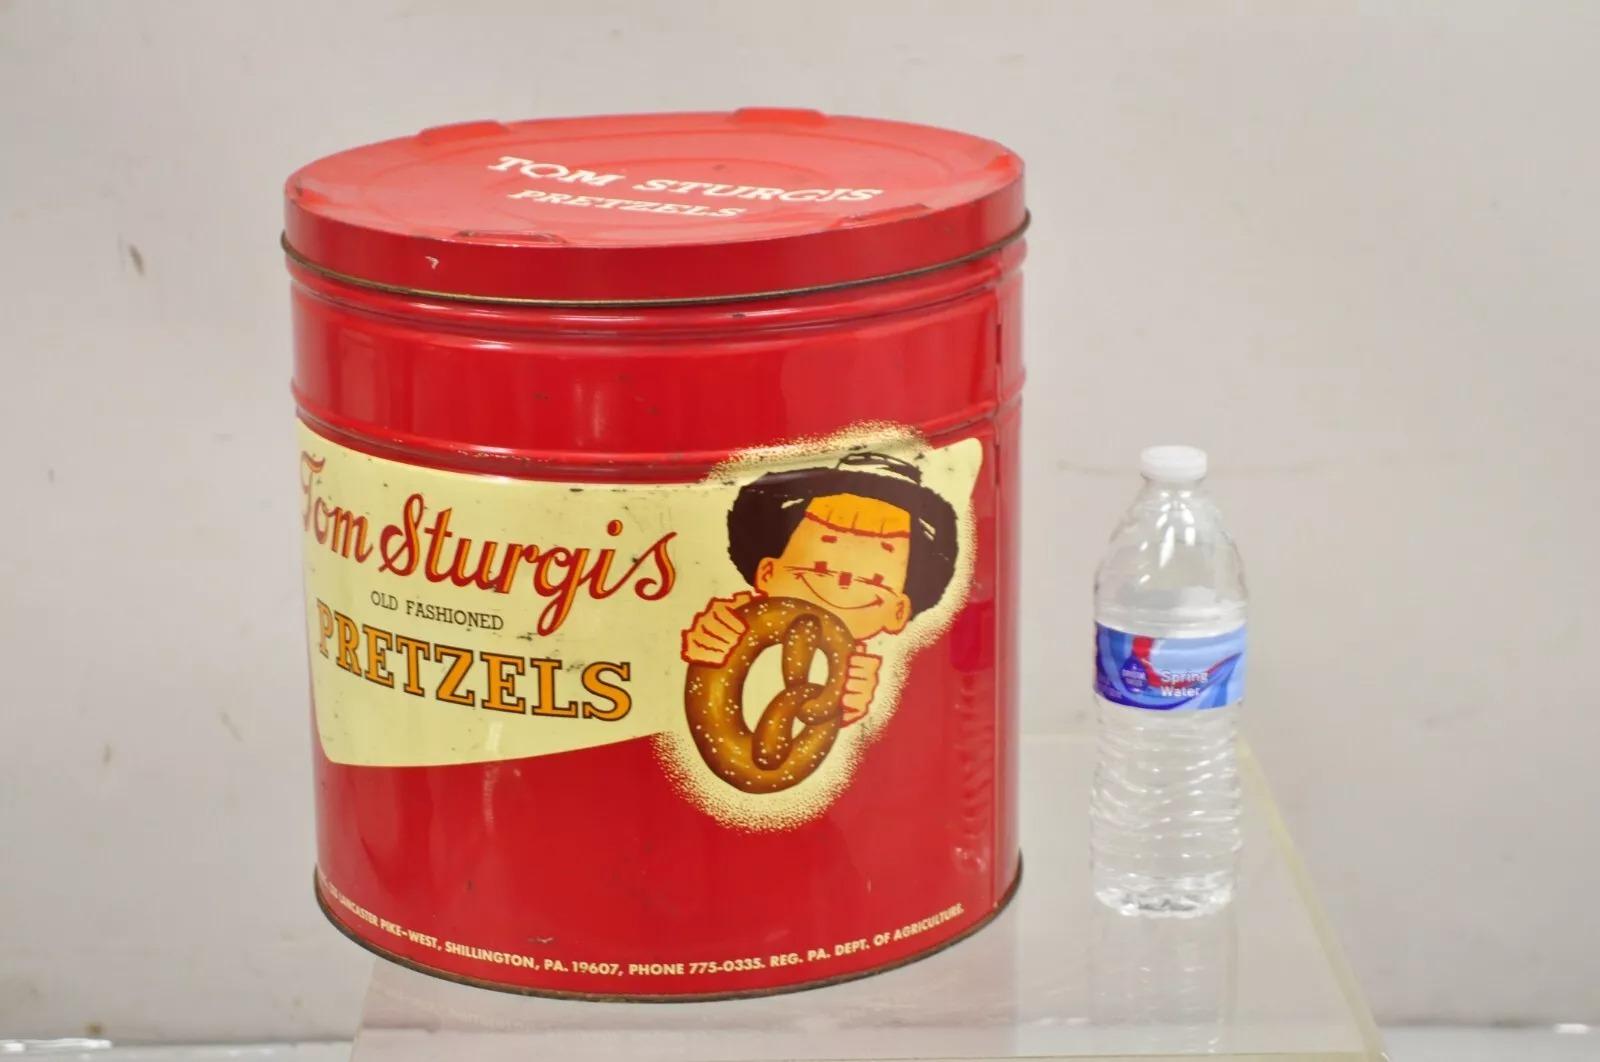 Vintage Tom Sturgis Pretzels Large Tin Metal Red Advertising Can. Circa Early to Mid 20th Century. Measurements: 12.5